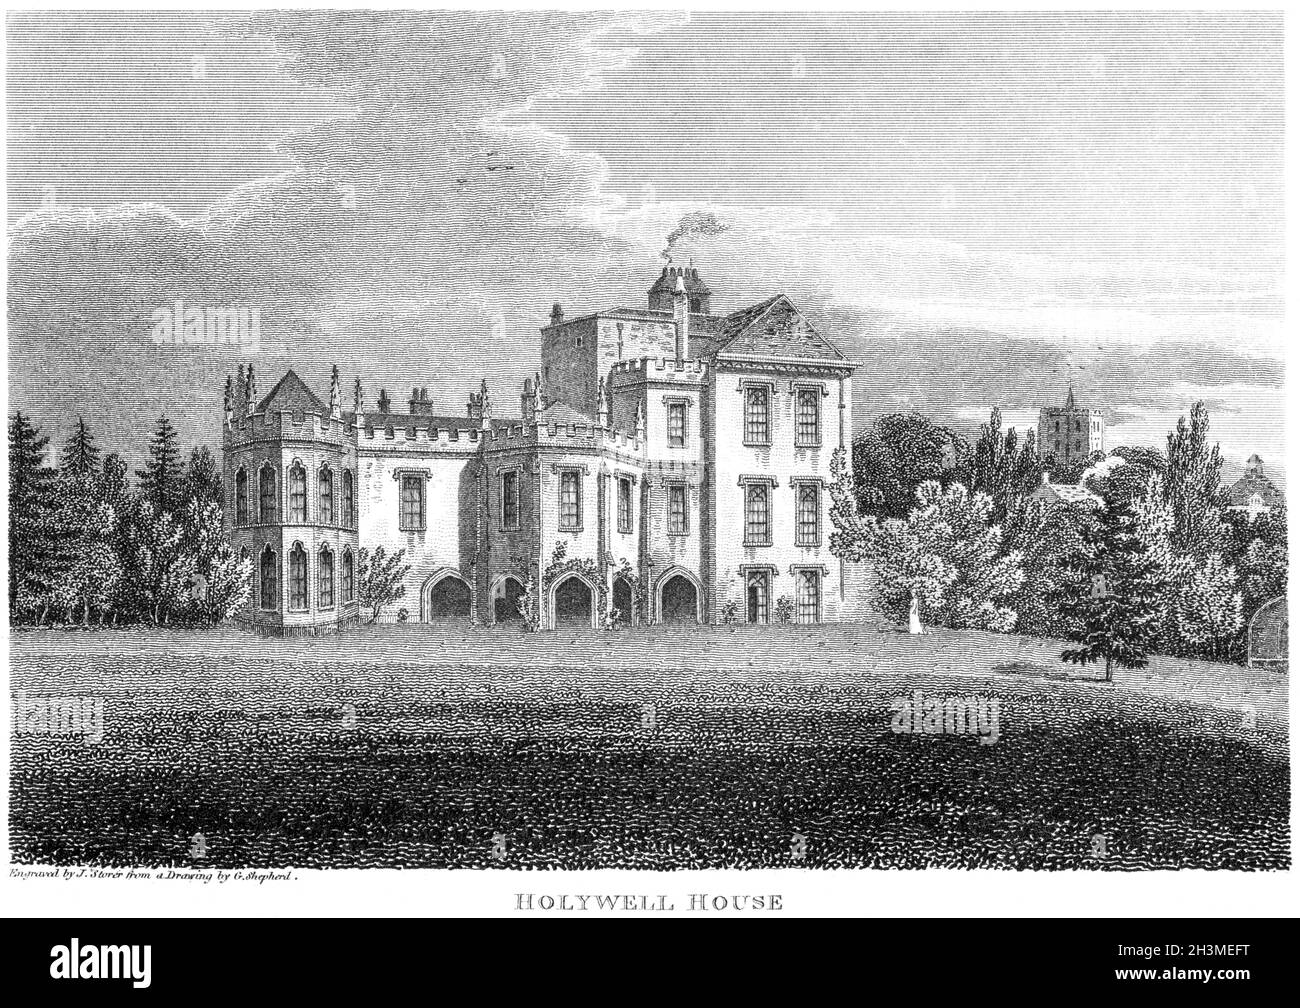 An engraving of Holywell House, Residence of the Dowager Countess Spencer, Hertfordshire UK scanned at high resolution from a book printed in 1812. Stock Photo